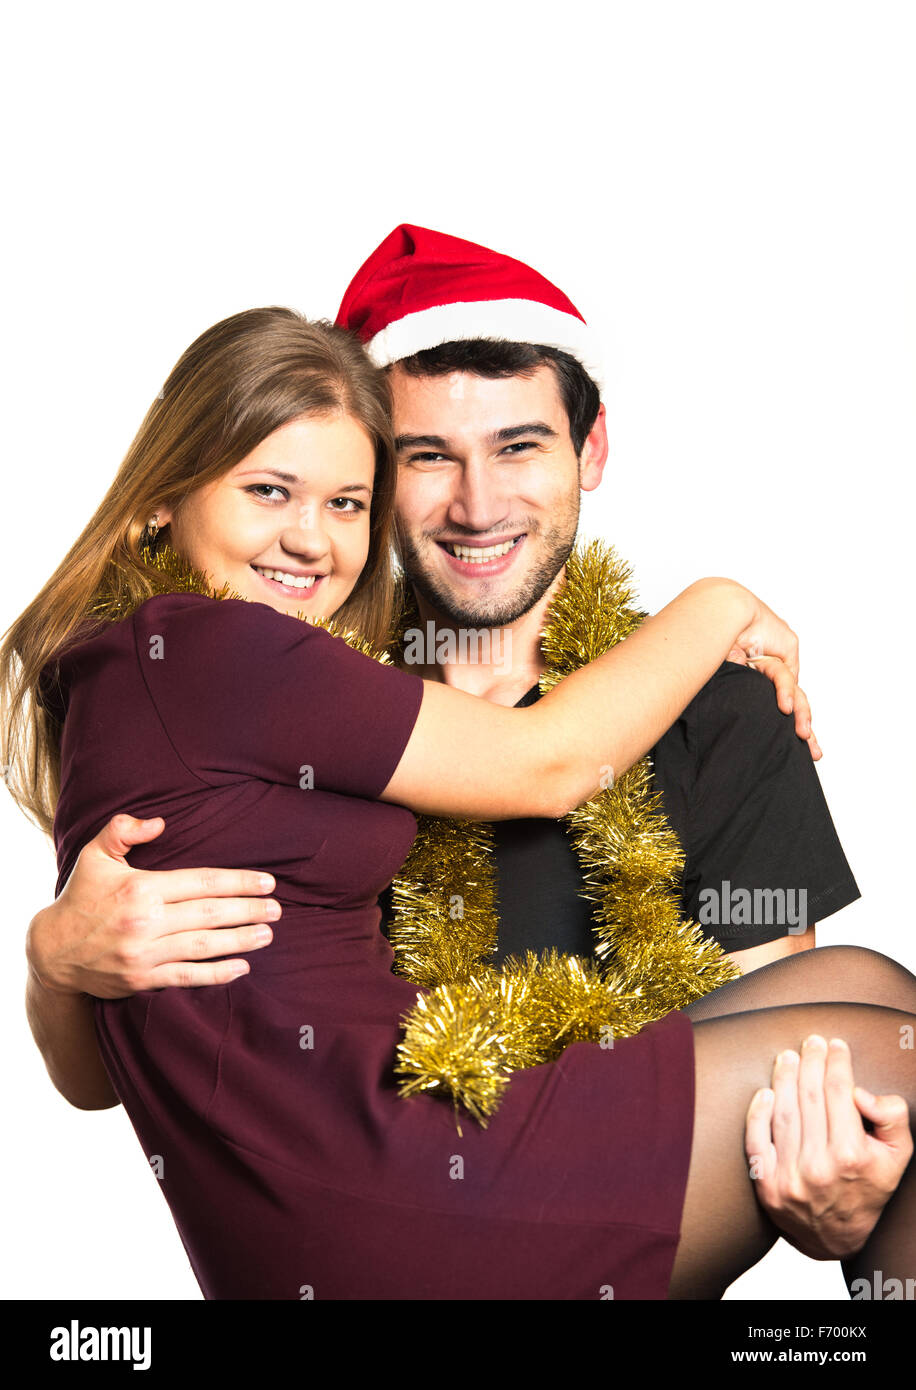 young couple, man and woman, smiling, happy, wearing Christmas decoration, man is carring woman Stock Photo